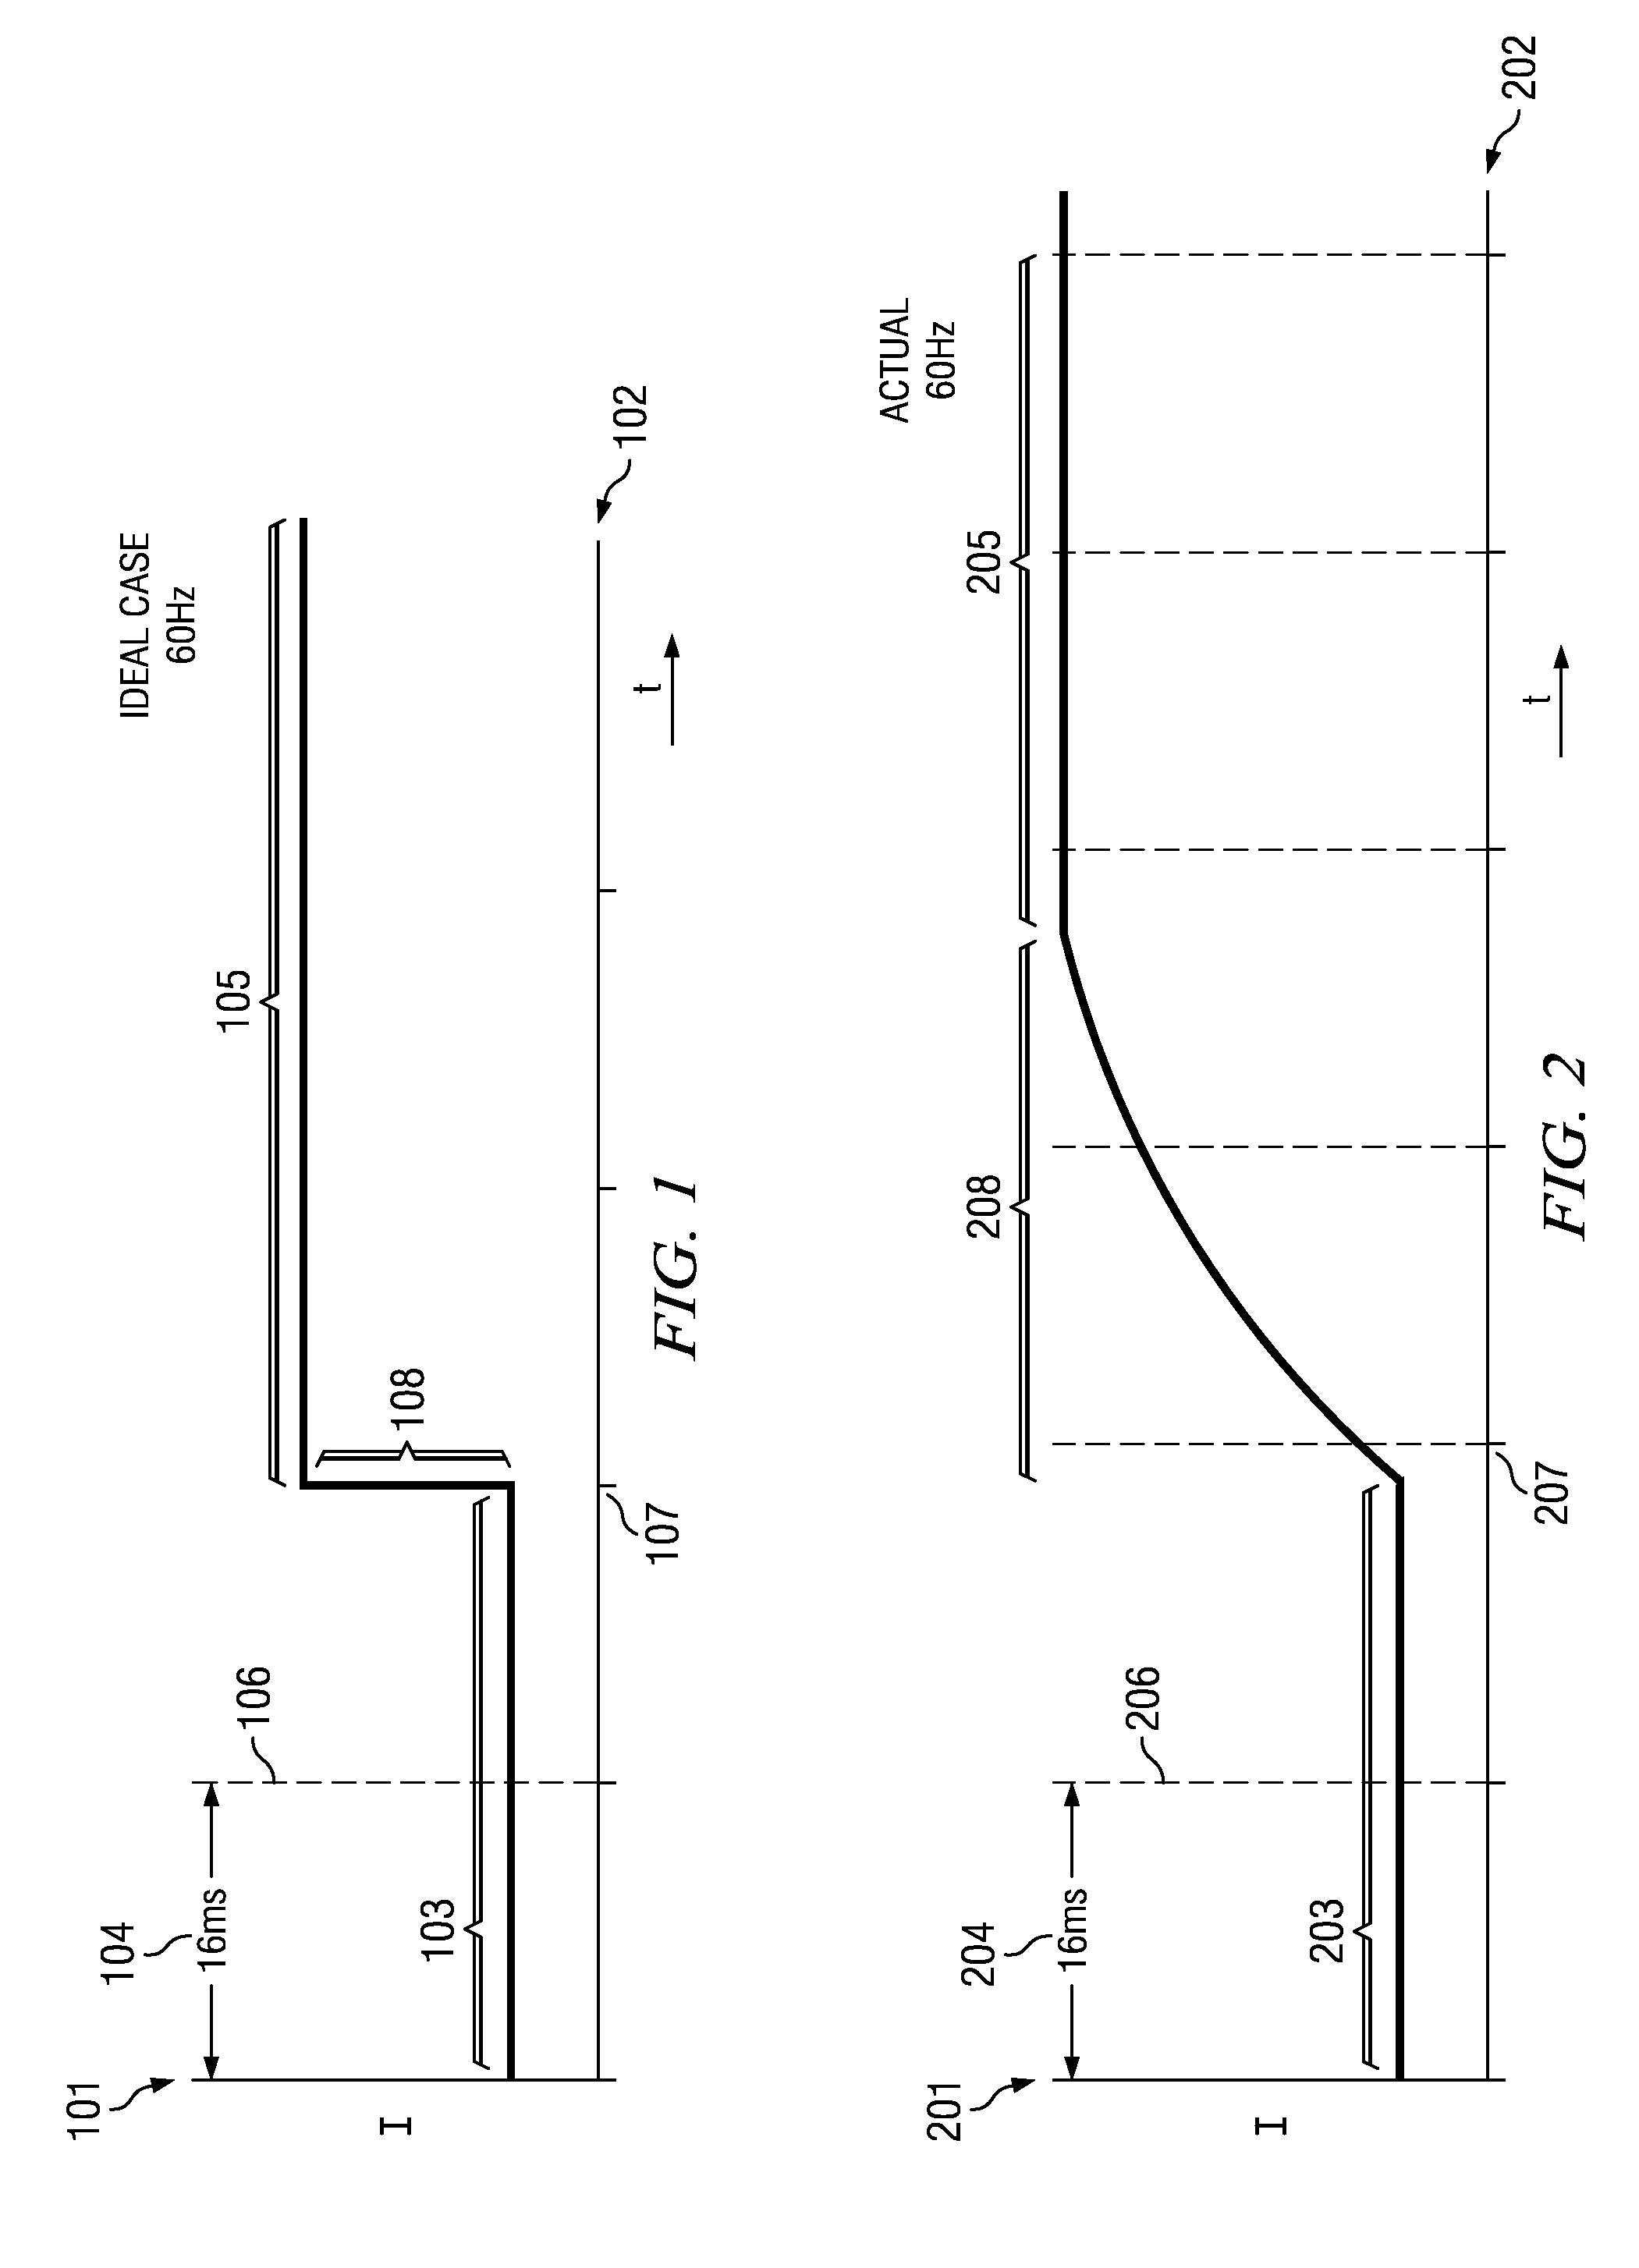 Stereoscopic flat panel display with synchronized backlight, polarization control panel, and liquid crystal display